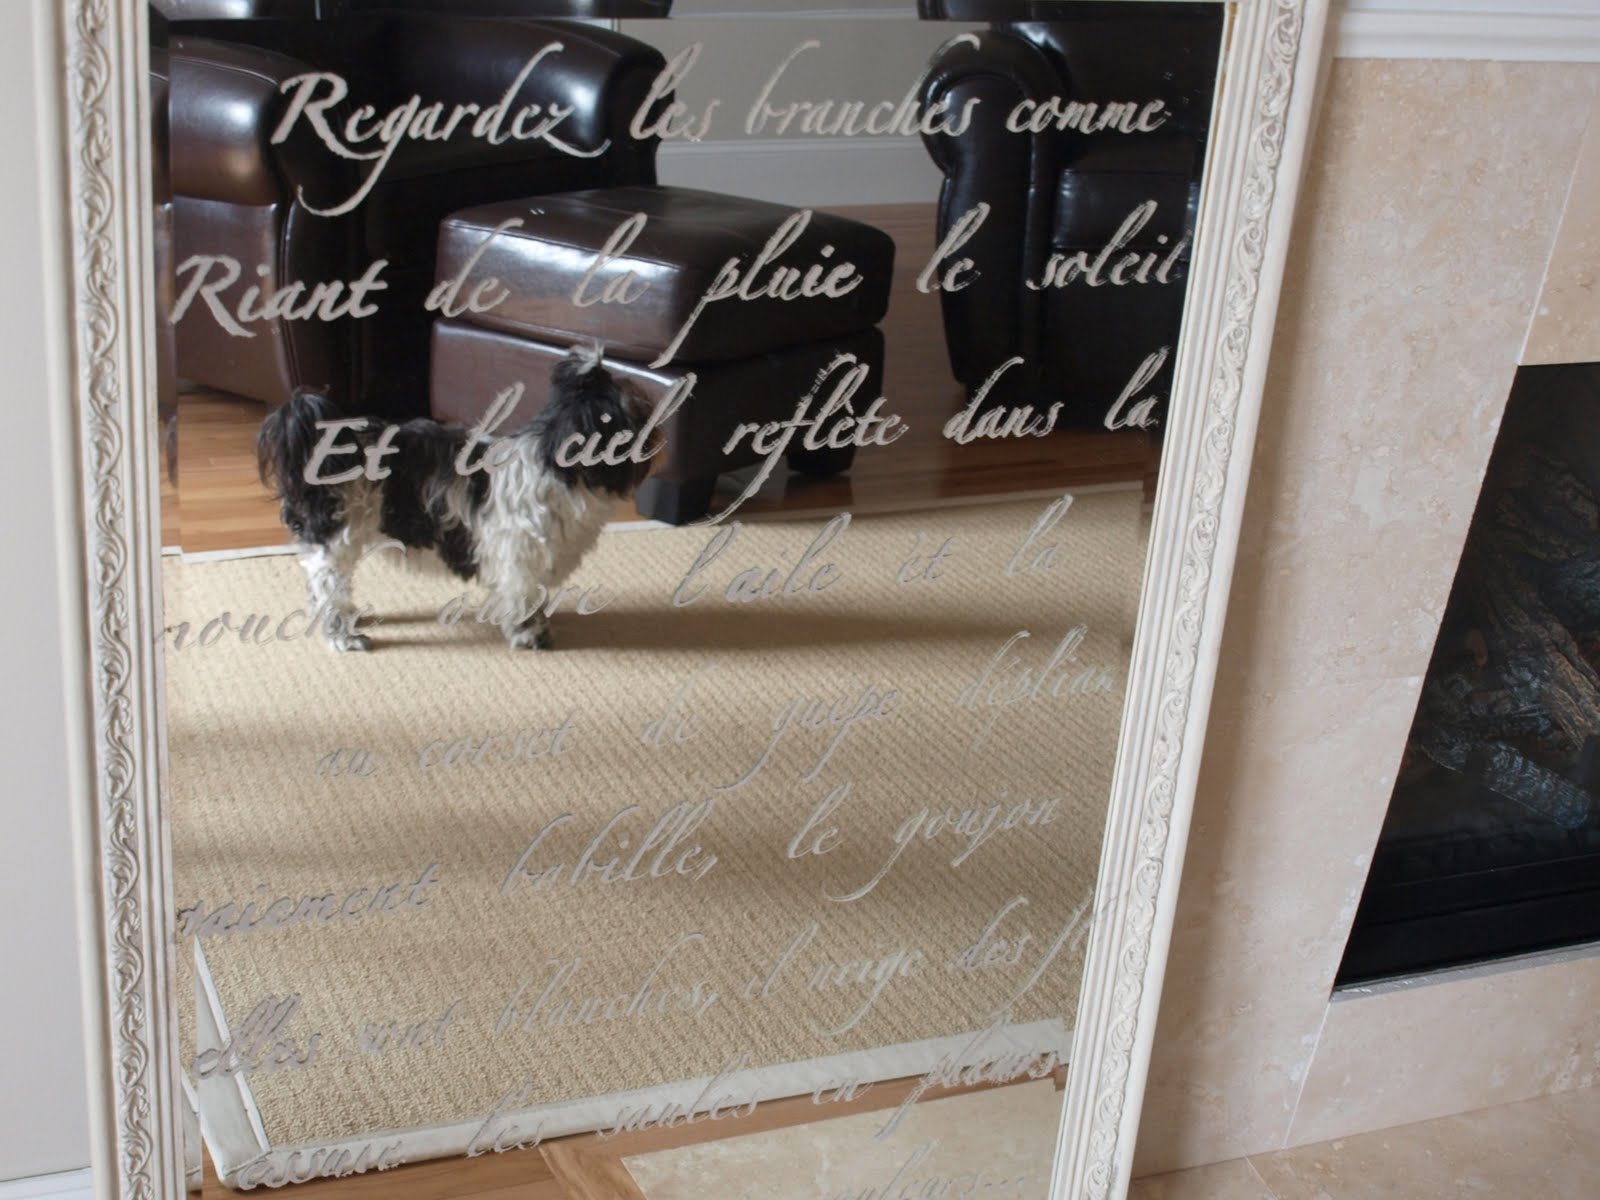 Springtime in Paris French poem stencil on a mirror for an etched French country mirror look! Hello Lovely Studio.